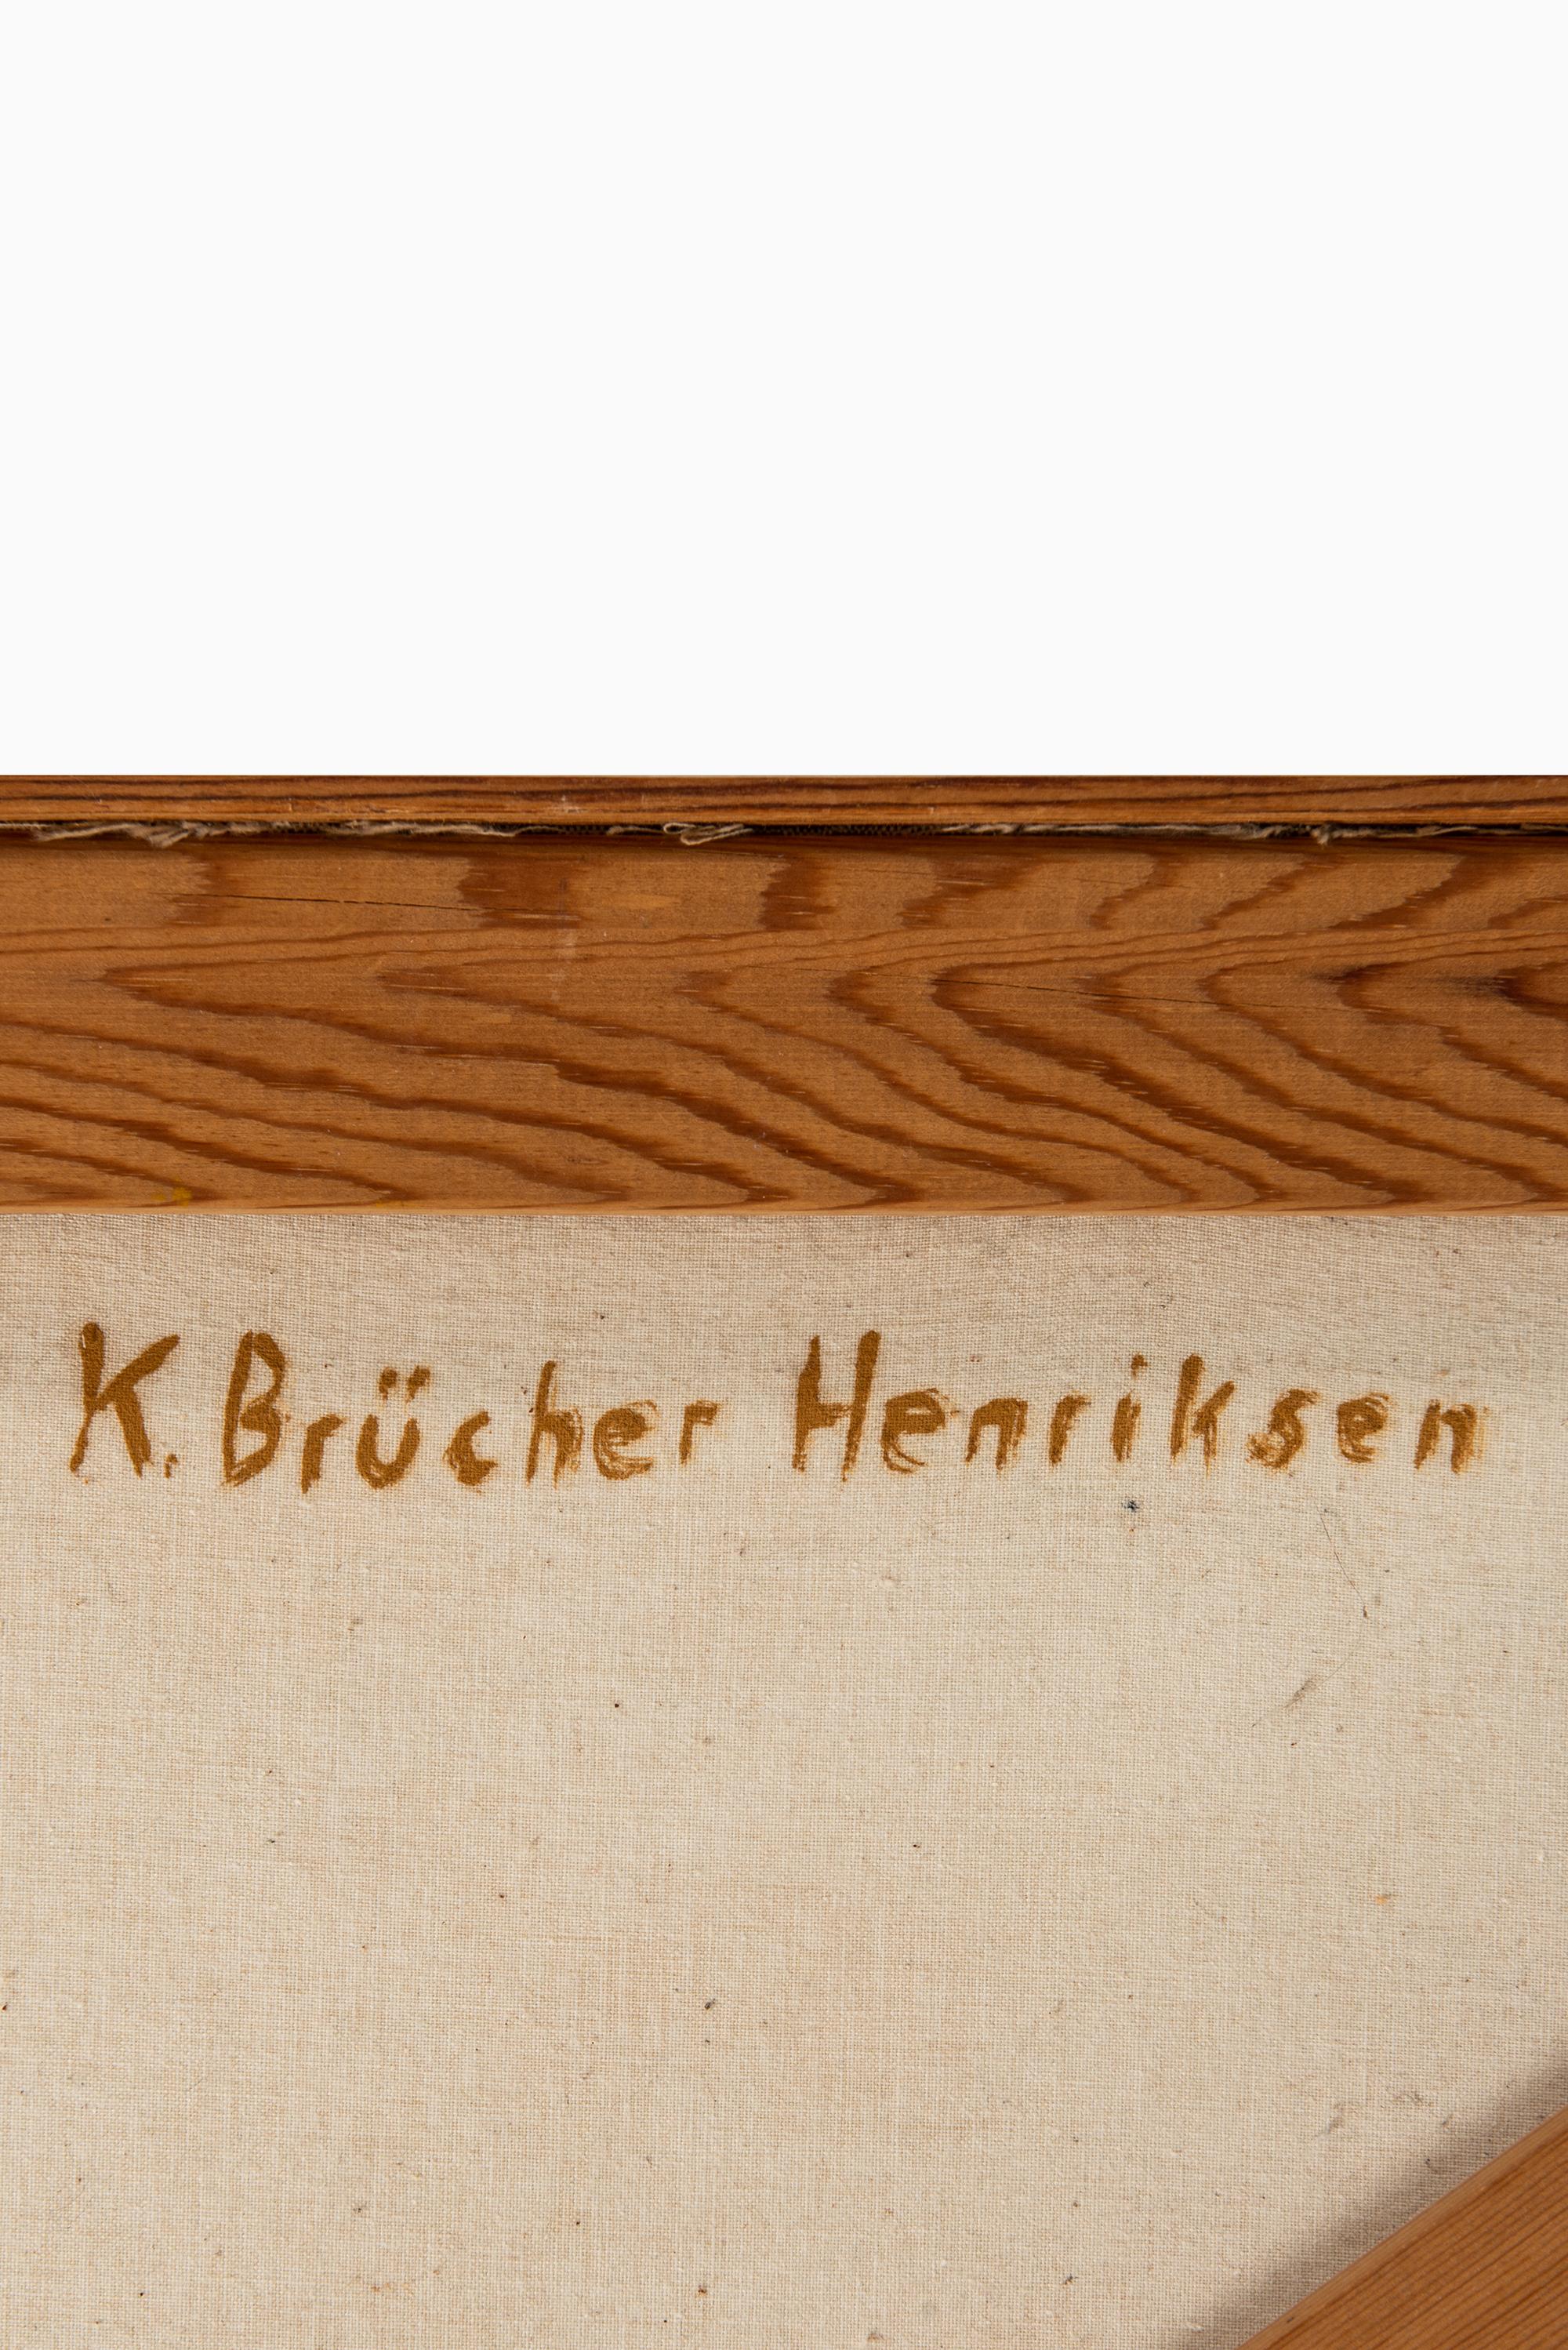 Karl Brücher Henriksen Large Oil Painting from 1970 In Good Condition For Sale In Limhamn, Skåne län